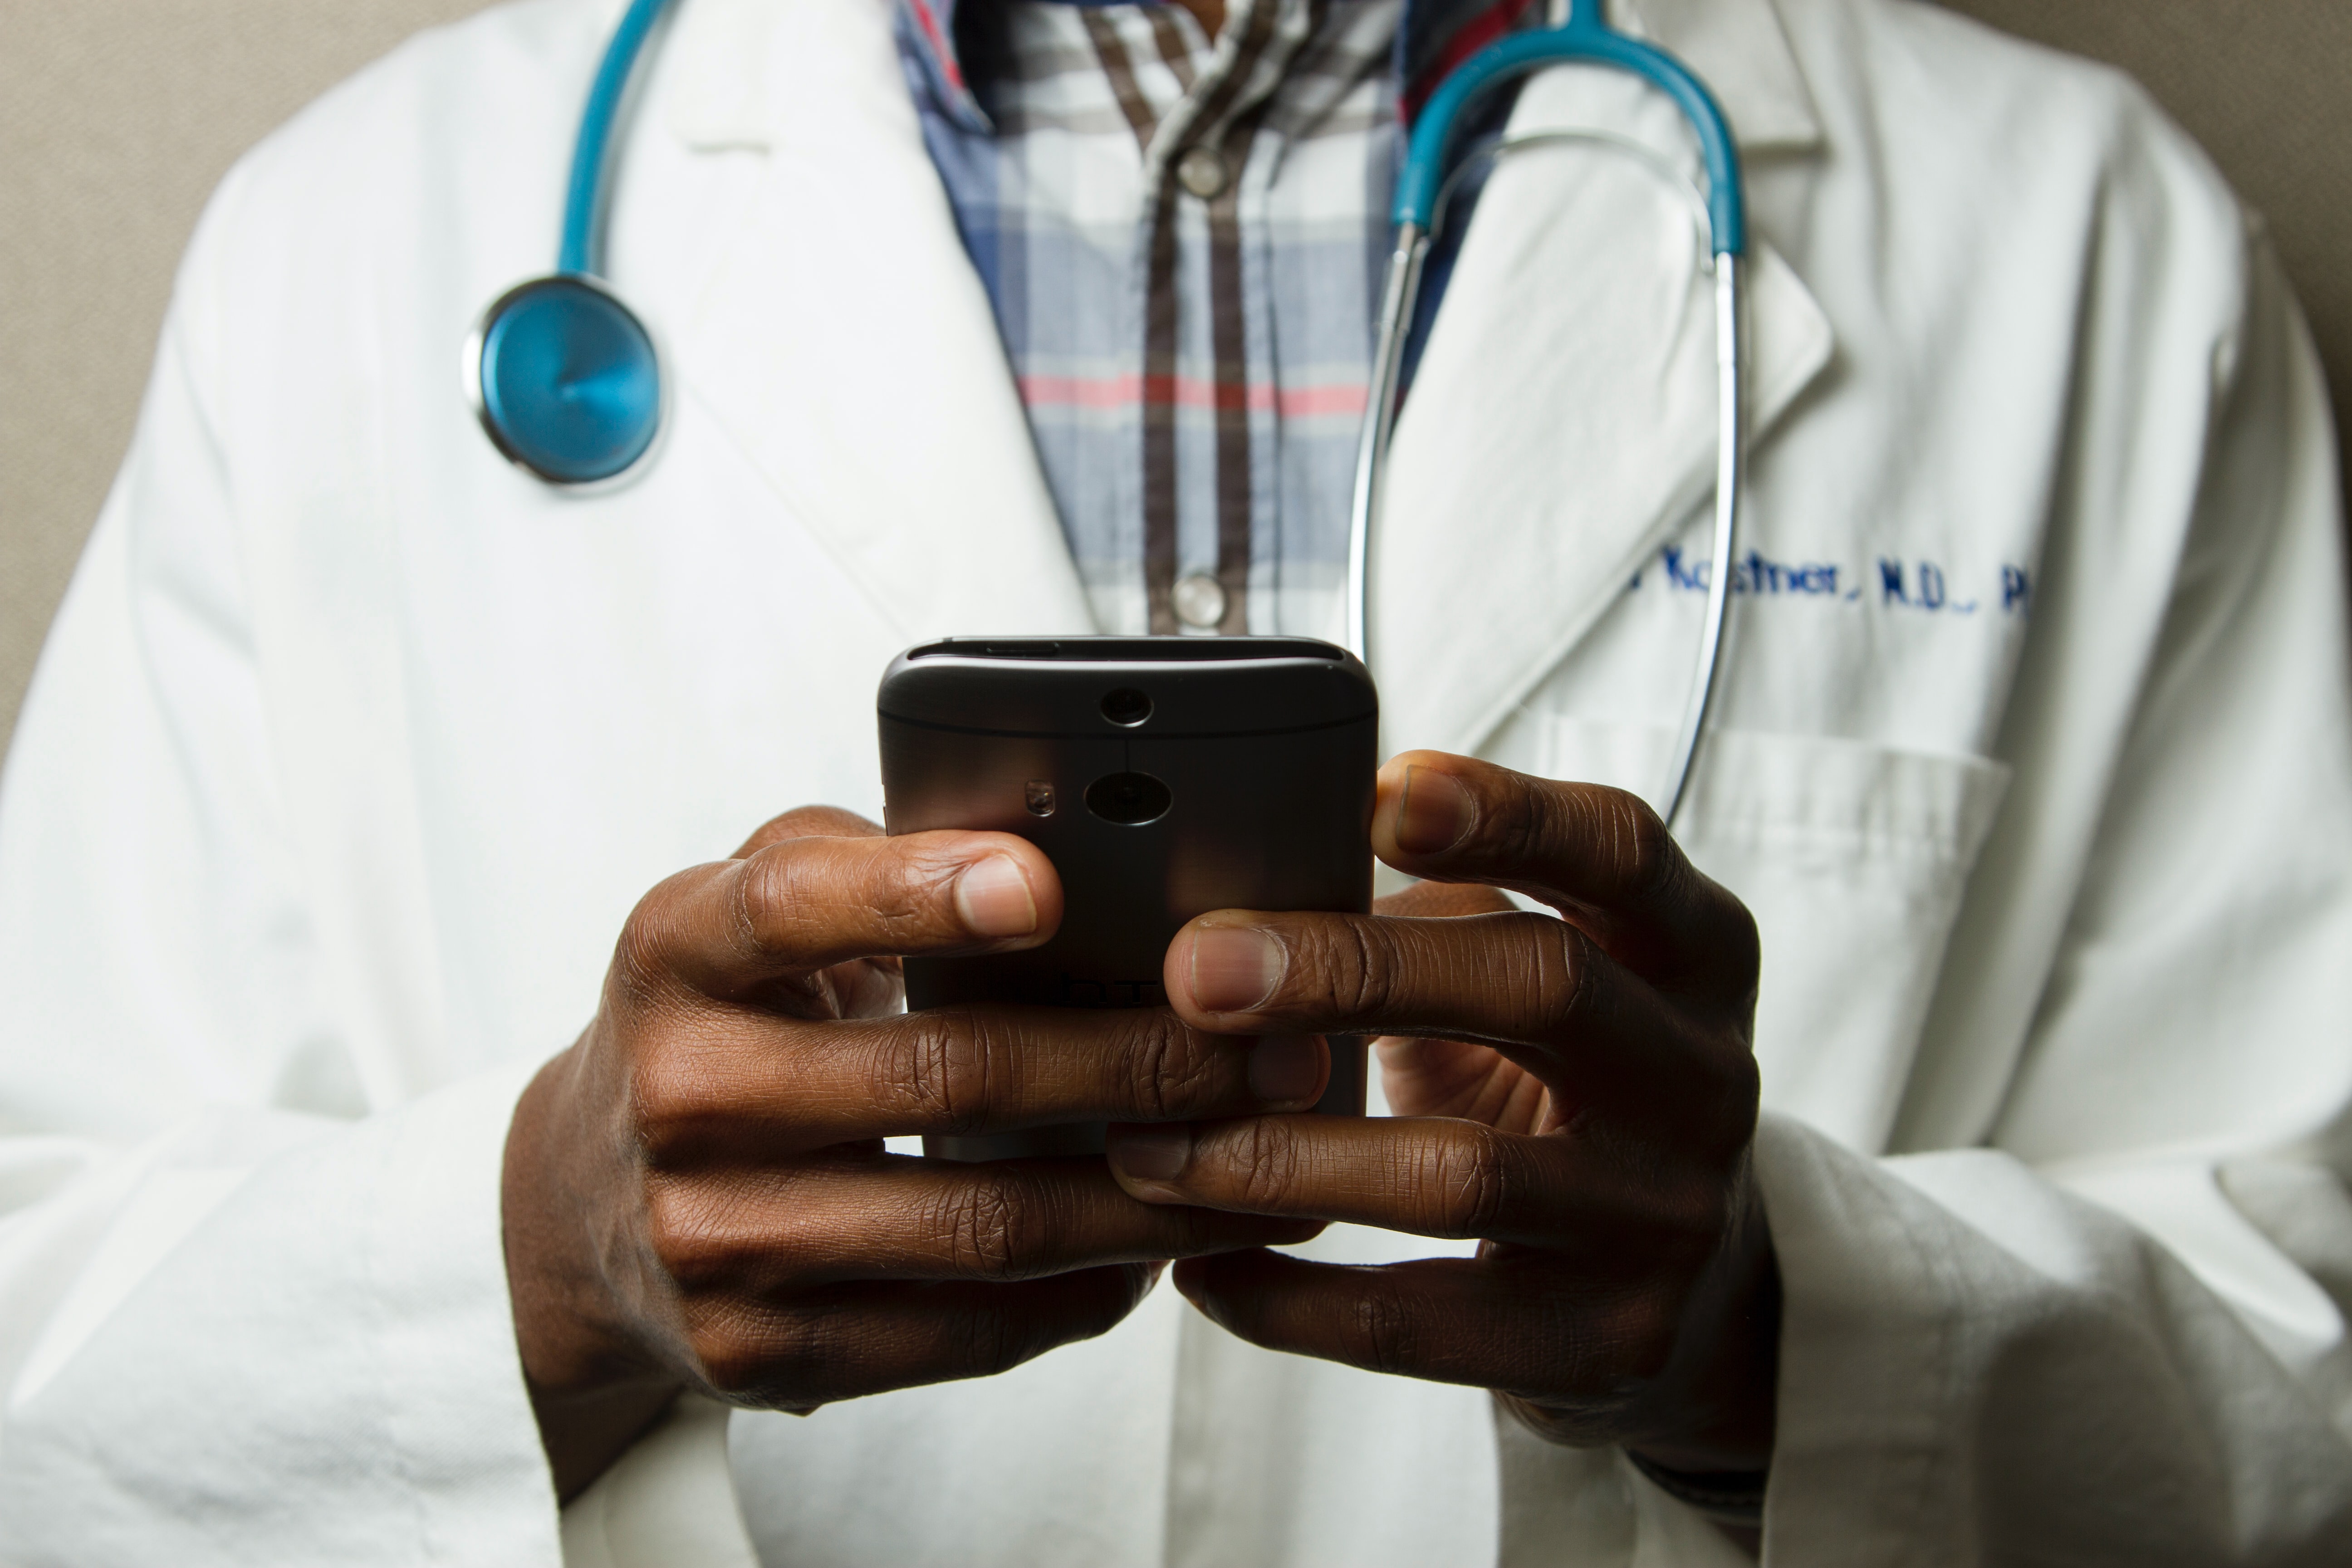 Healthcare worker holding a cellular device